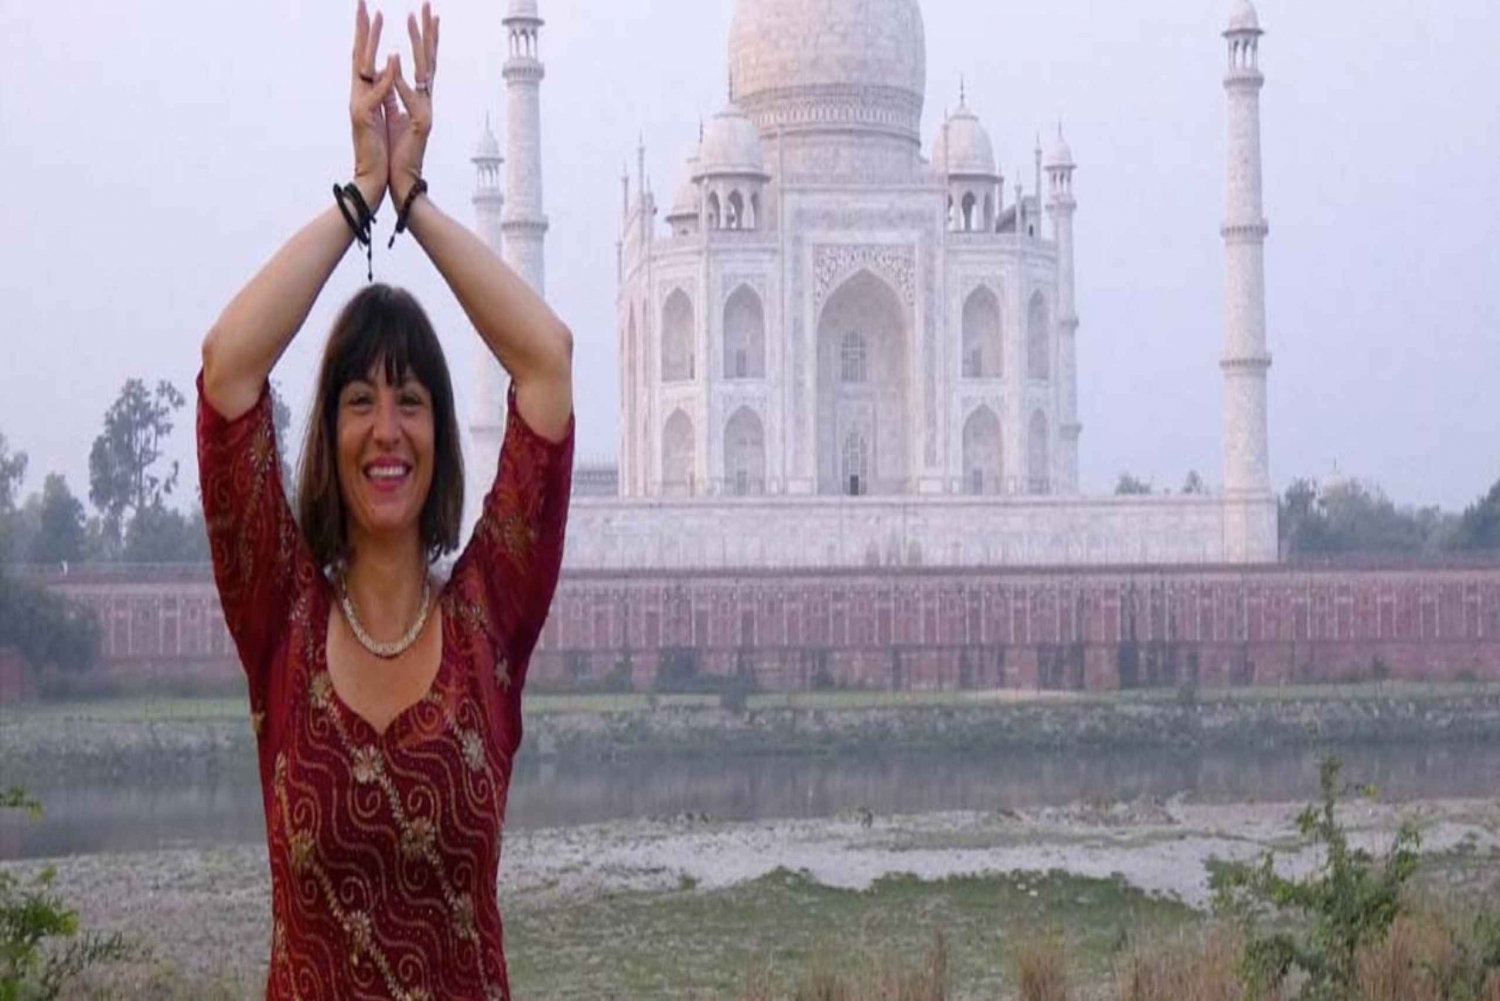 From New Delhi: Agra & Taj Mahal Private Day Trip with Guide